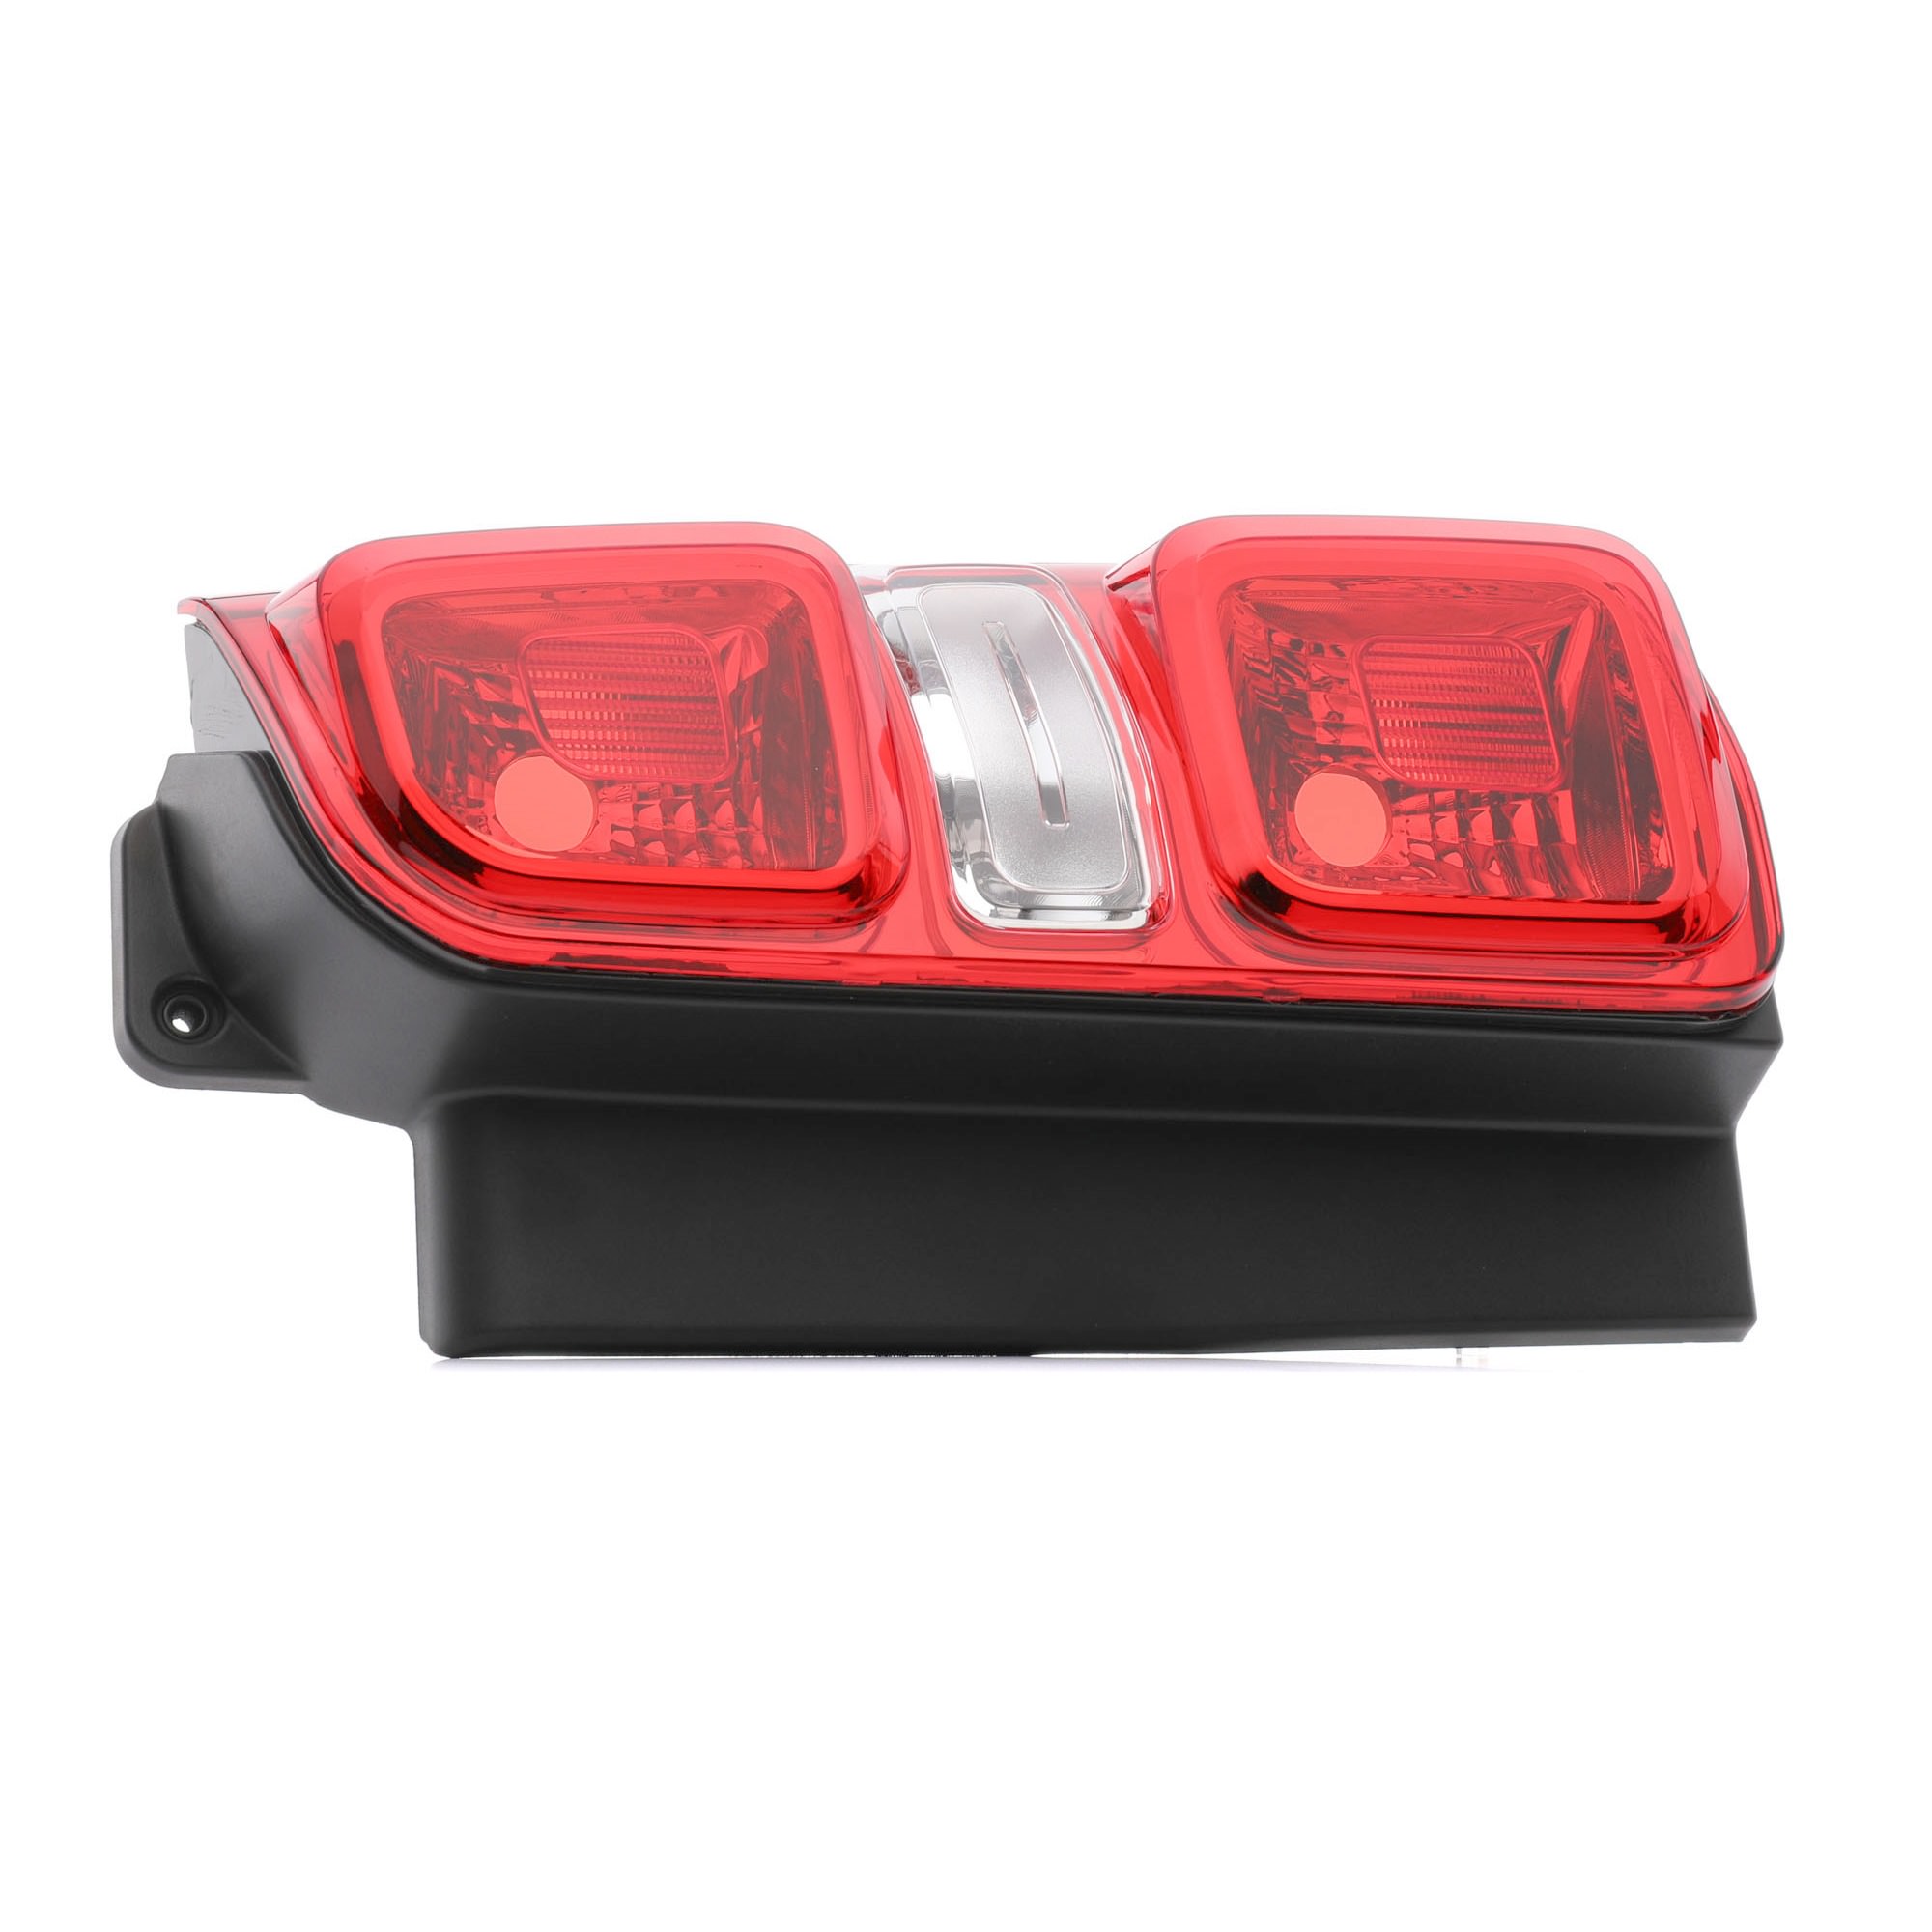 ABAKUS 038-38-702 Rear light PEUGEOT experience and price